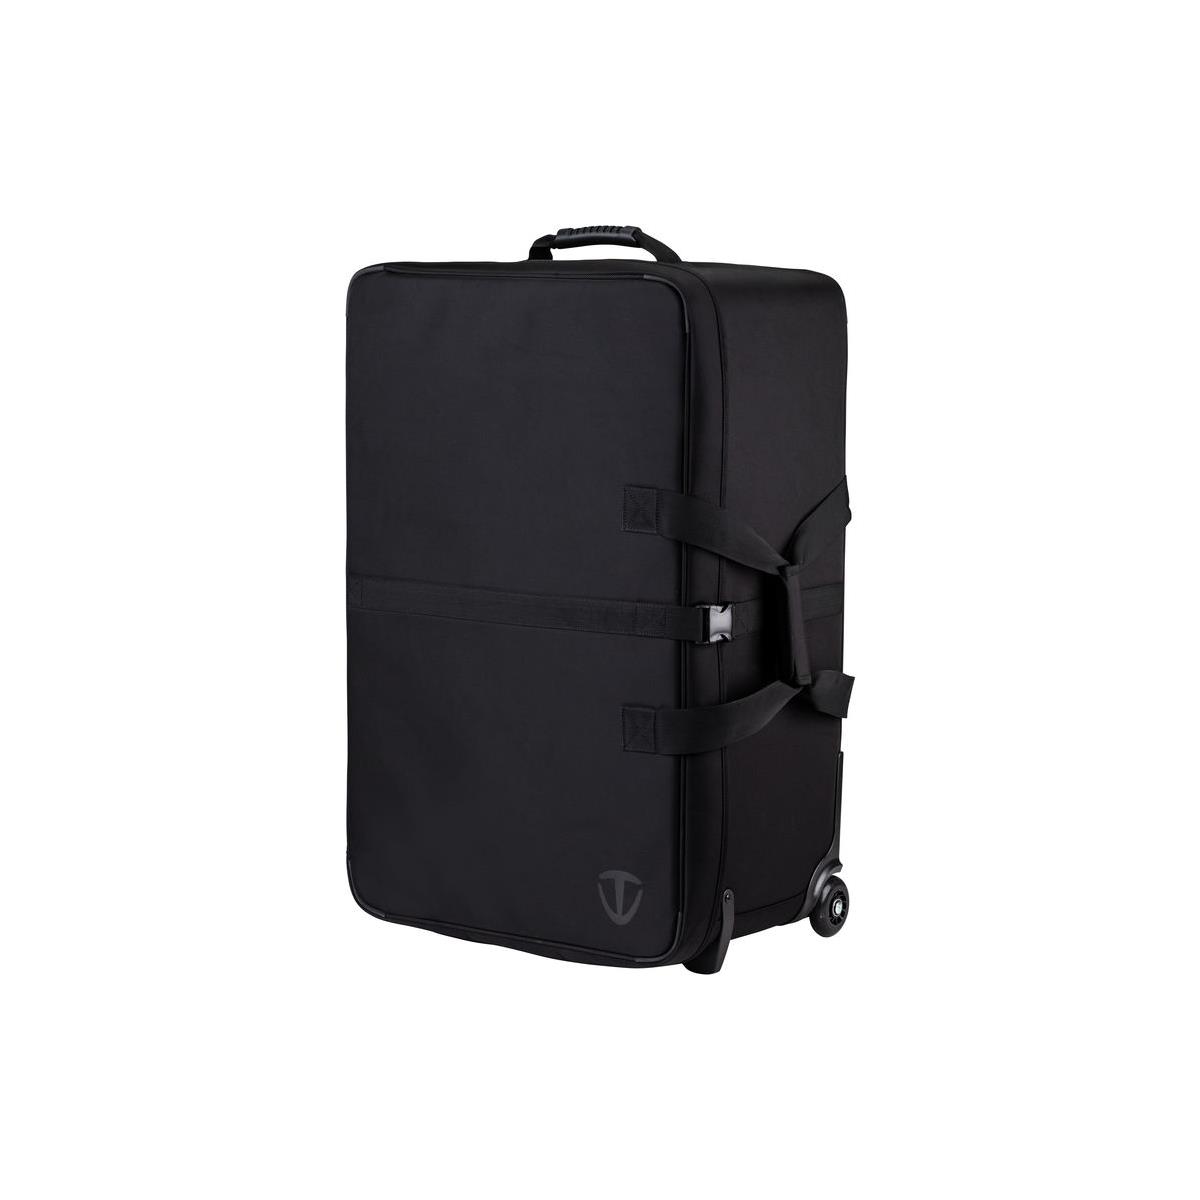 Image of Tenba Attache 3220W Transport Air Wheeled Case for Variety of Photo Gear